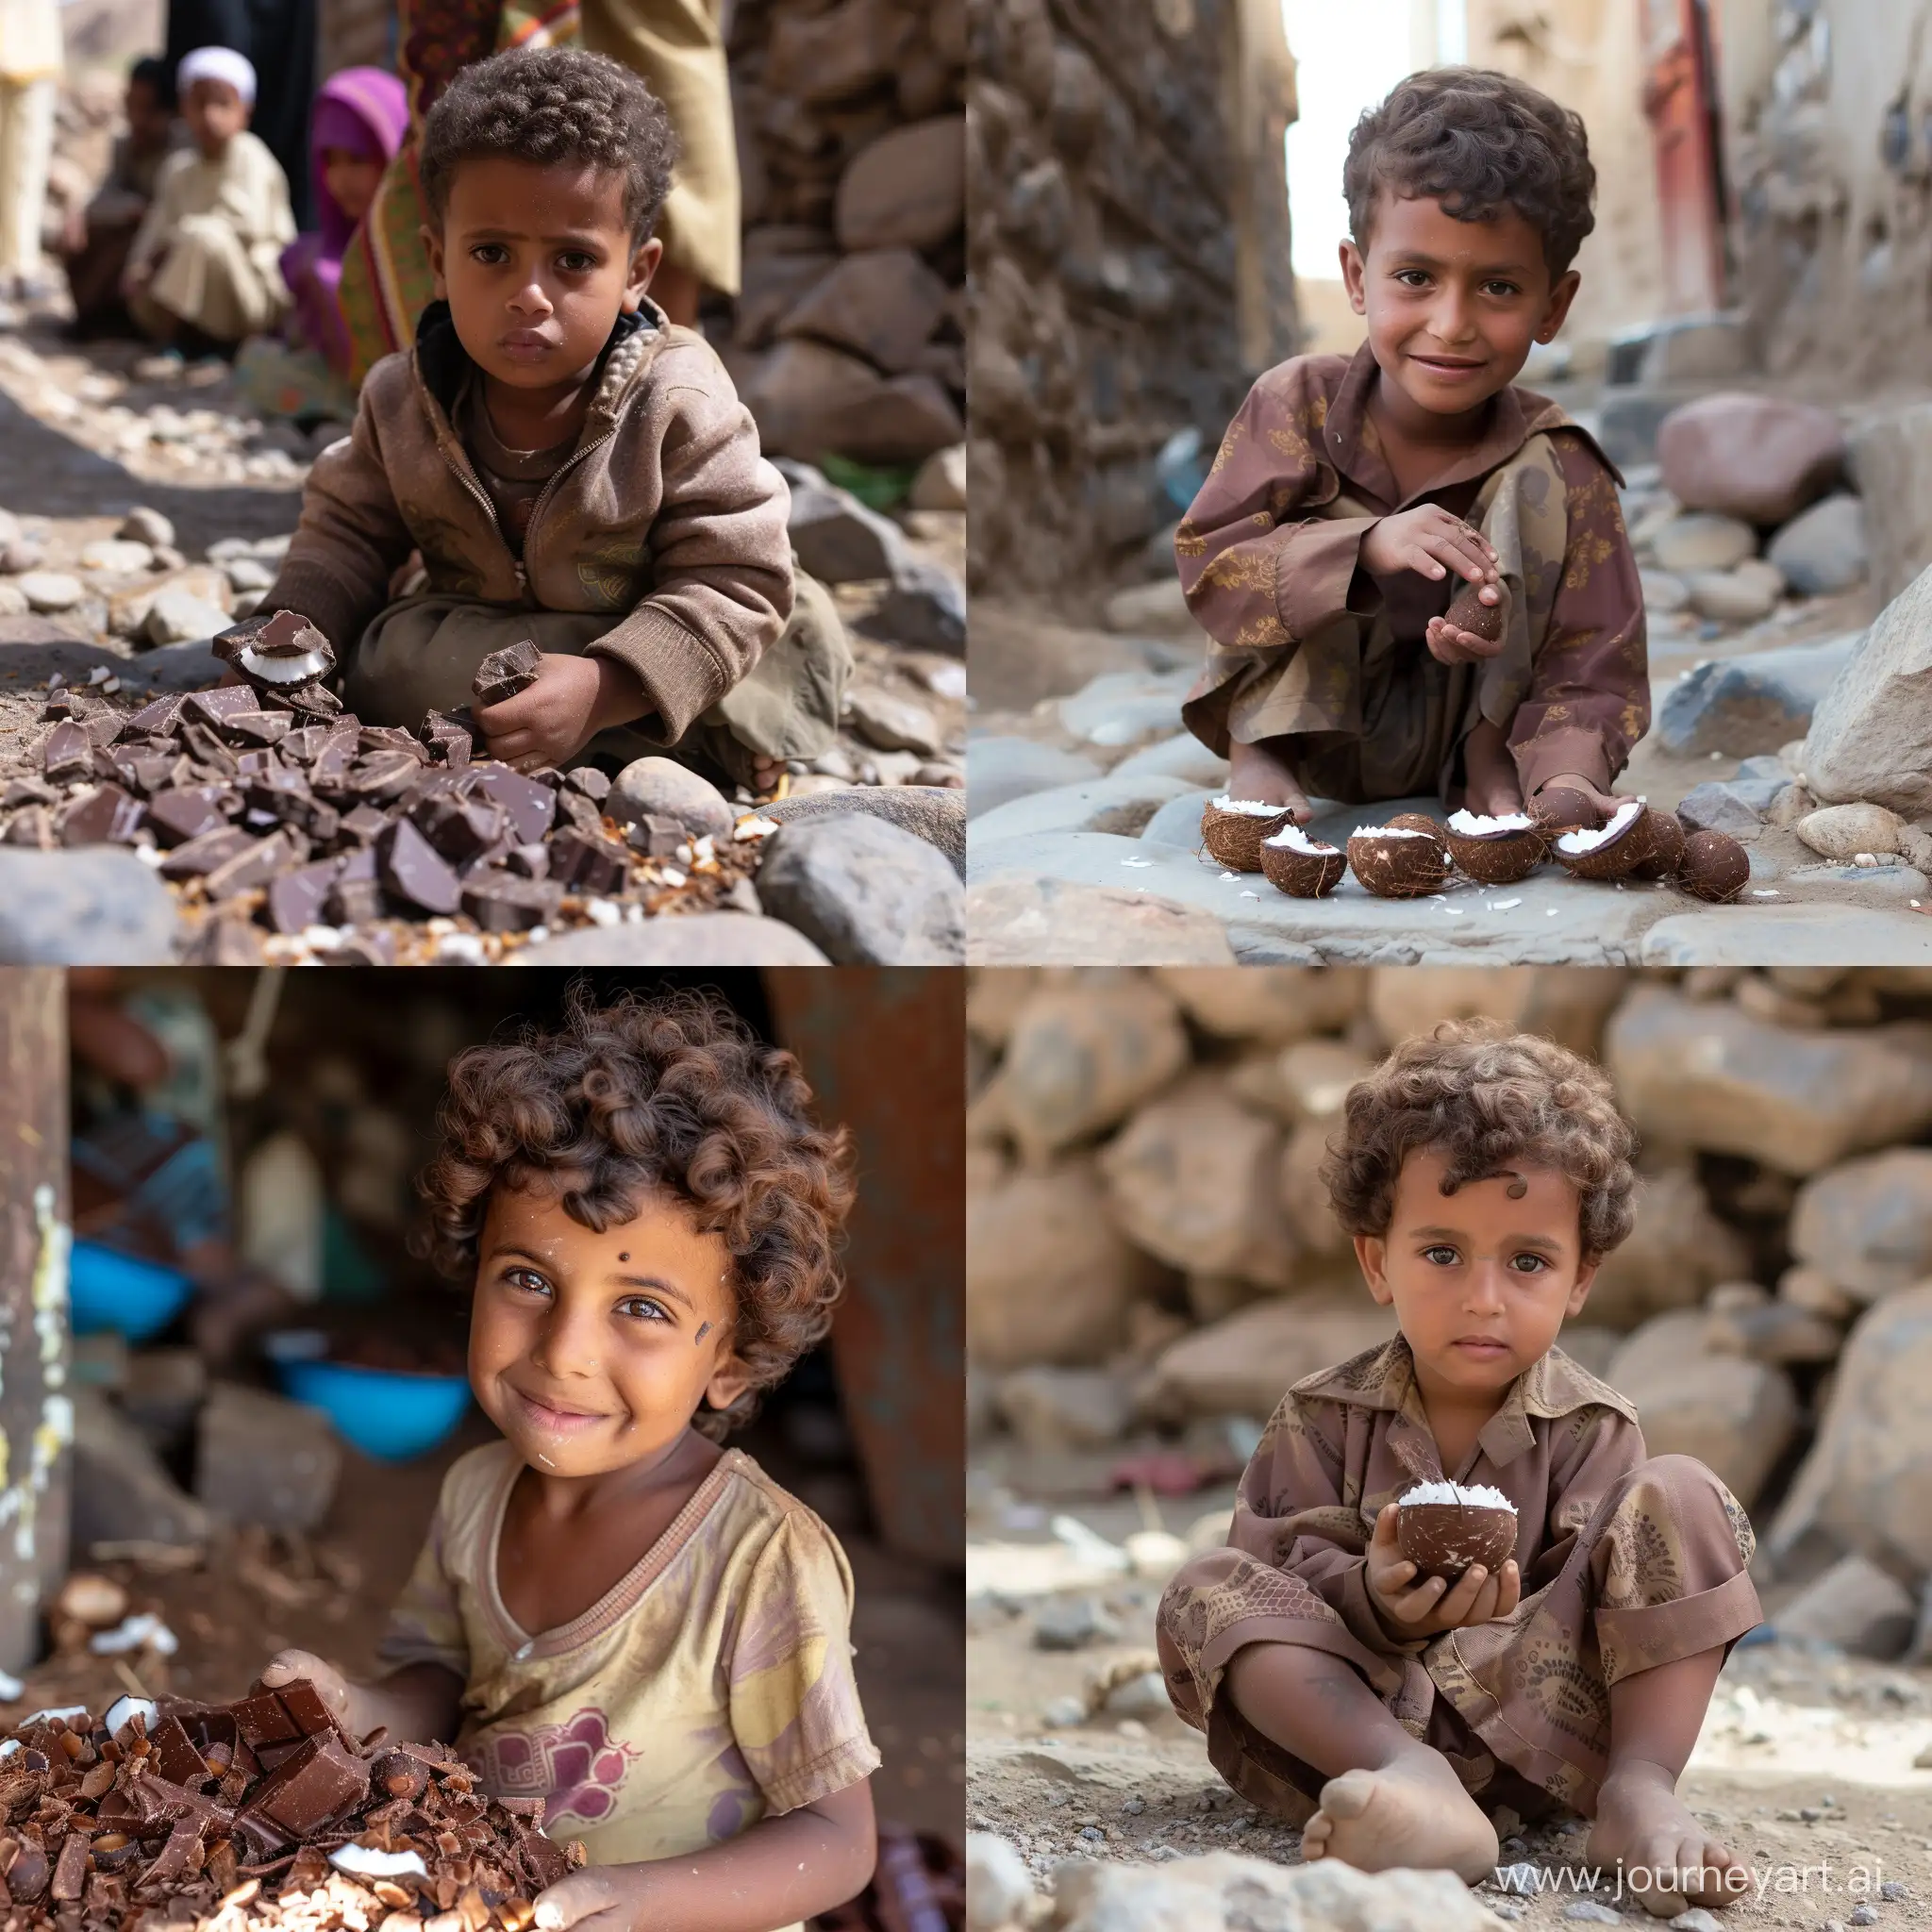 A Yemeni child steals chocolate coconut candy